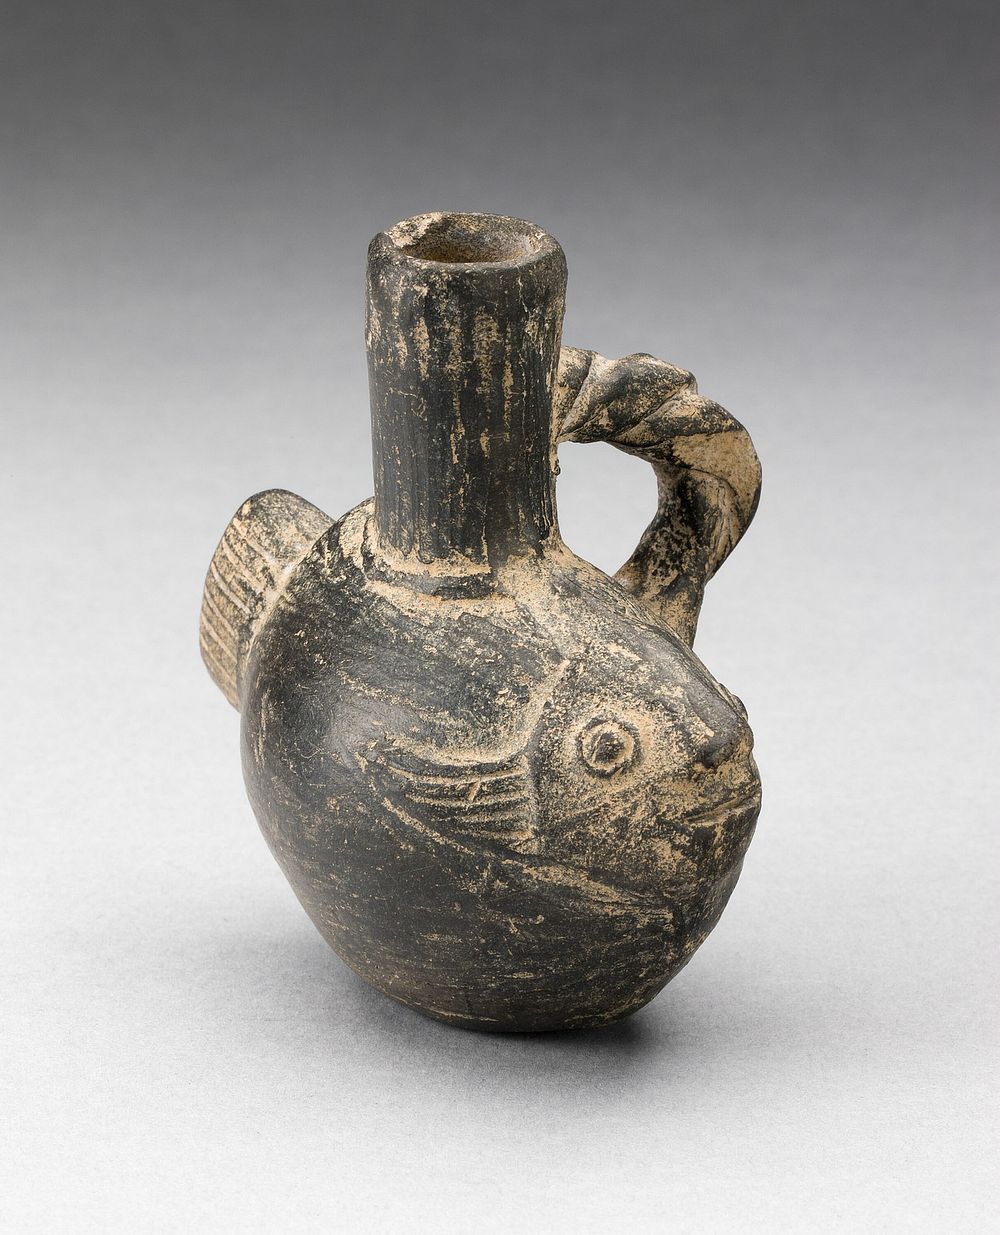 Miniature Spout Vessel in the Form of a Fish with a Rope-shaped Handle by Chimú